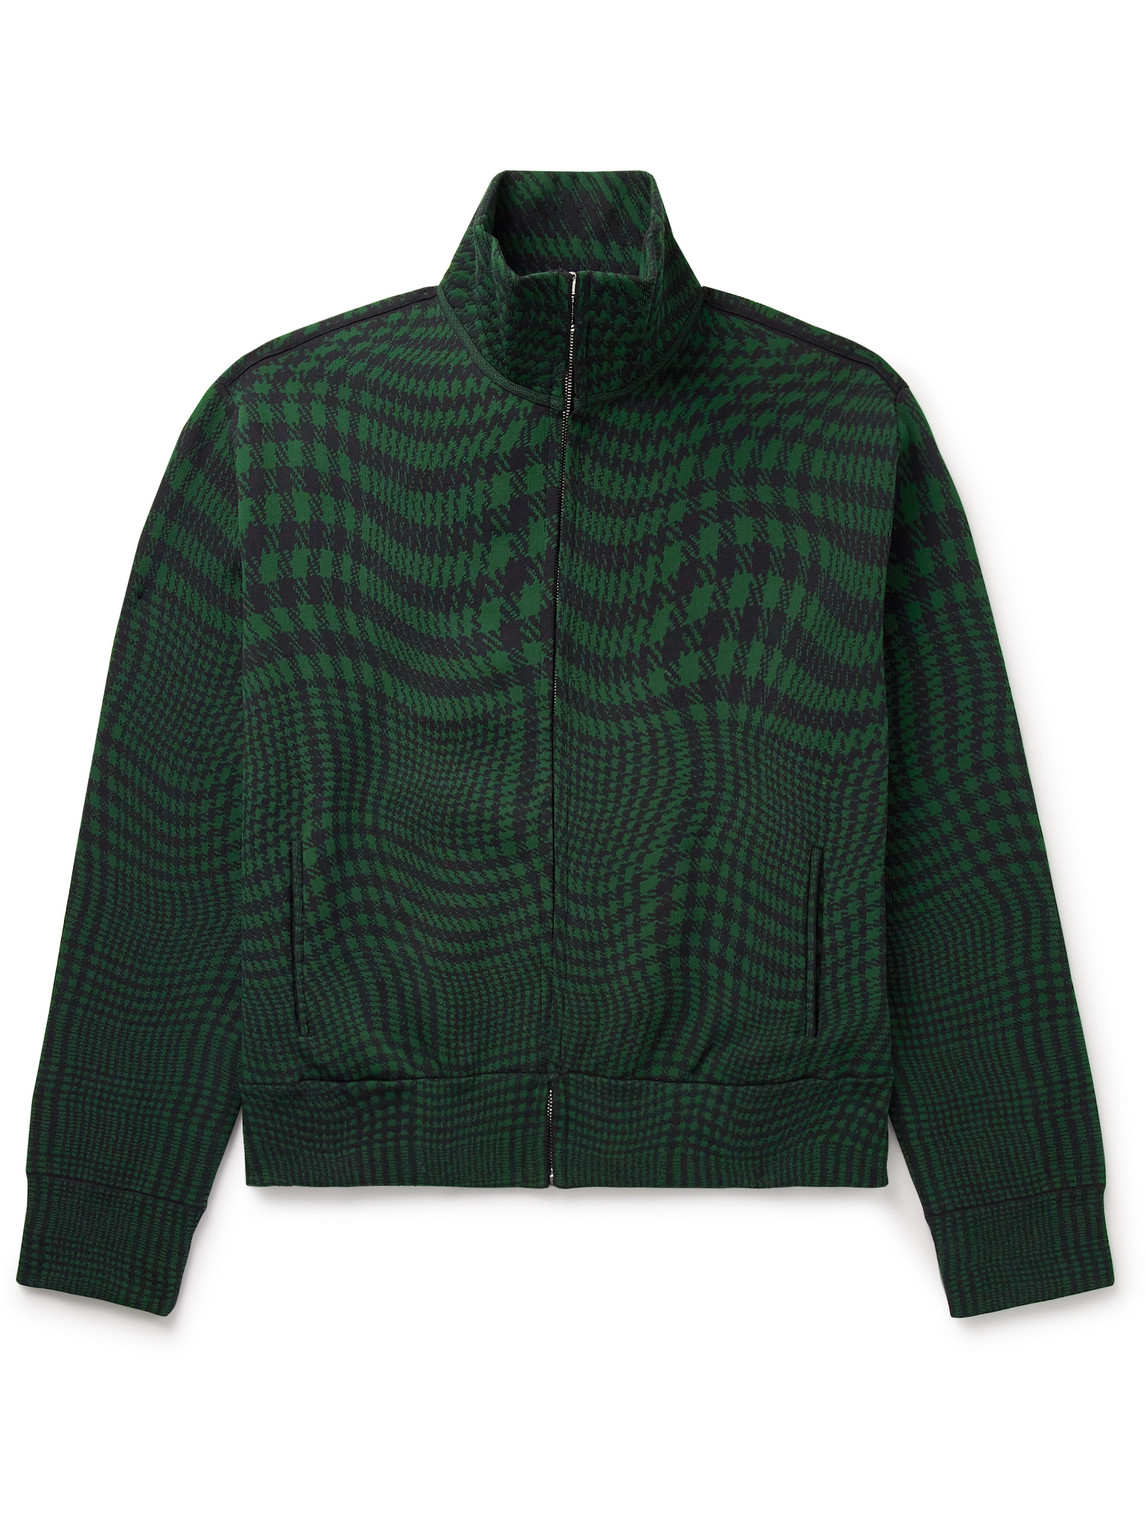 Burberry Houndstooth Ponte Track Jacket In Green